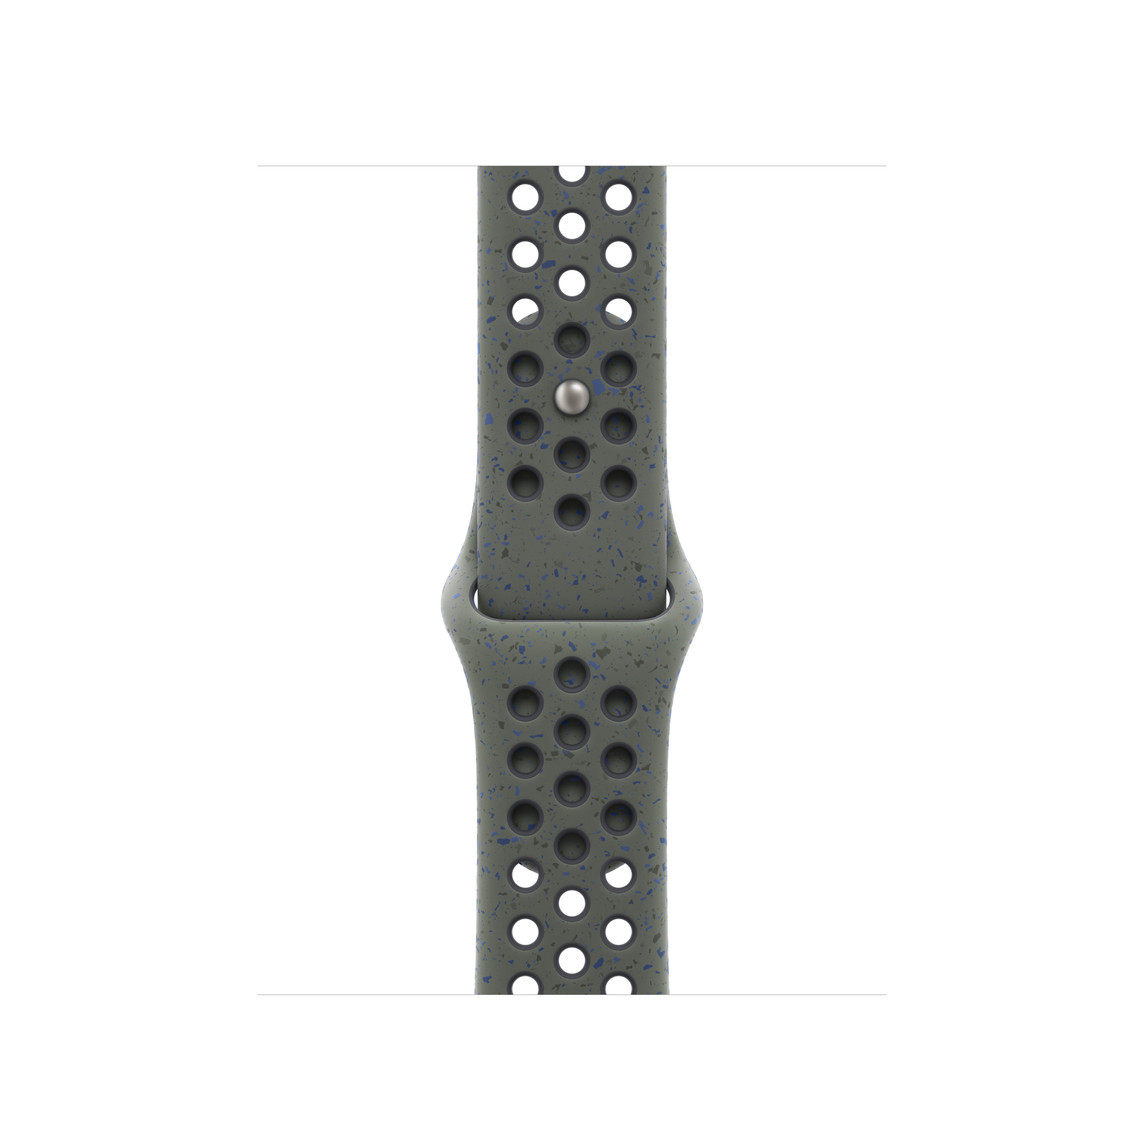 Cargo Khaki (dark green) Nike Sport Band, smooth fluoroelastomer with perforations for breathability and pin-and-tuck closure